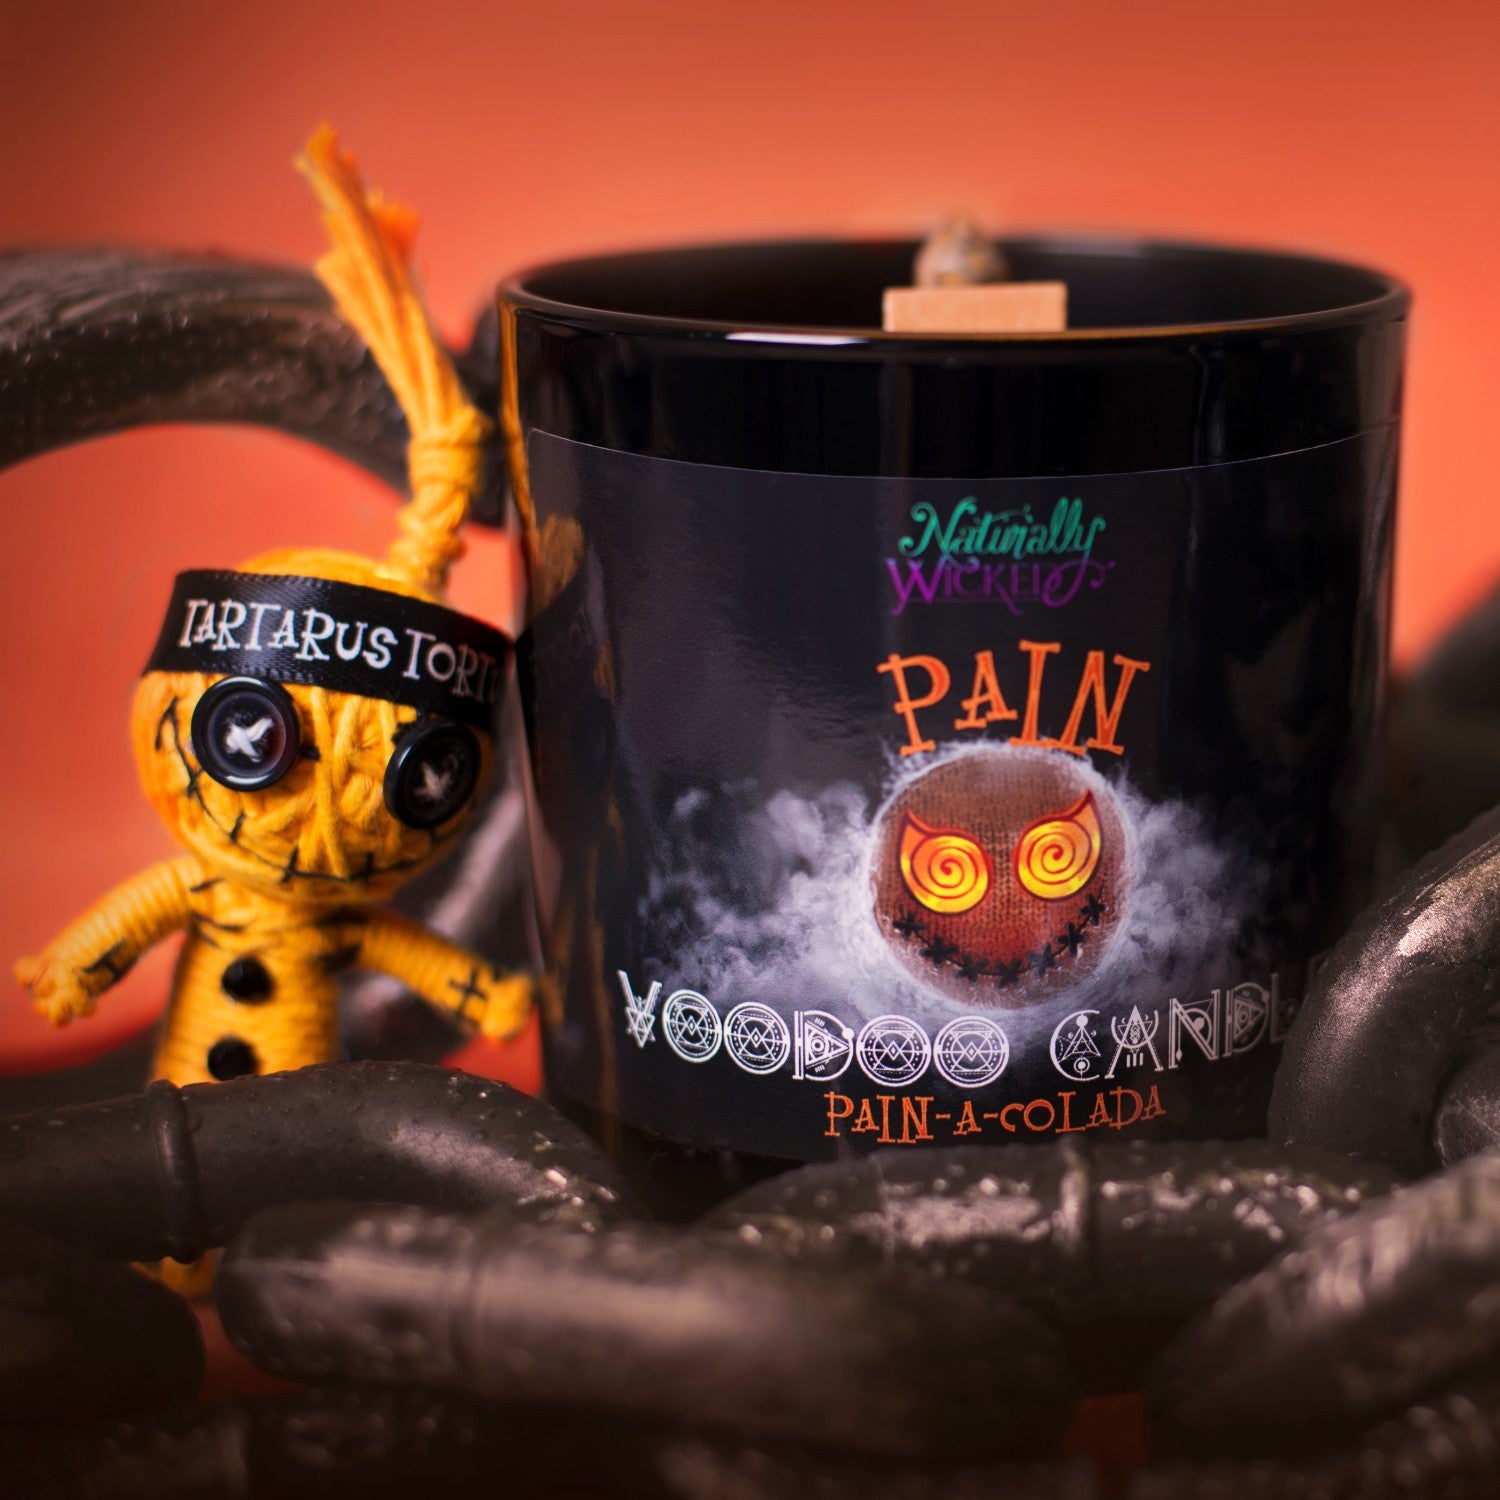 Naturally Wicked Voodoo Pain Spell Candle Amongst Torture Chains & Orange Voodoo Pain Doll